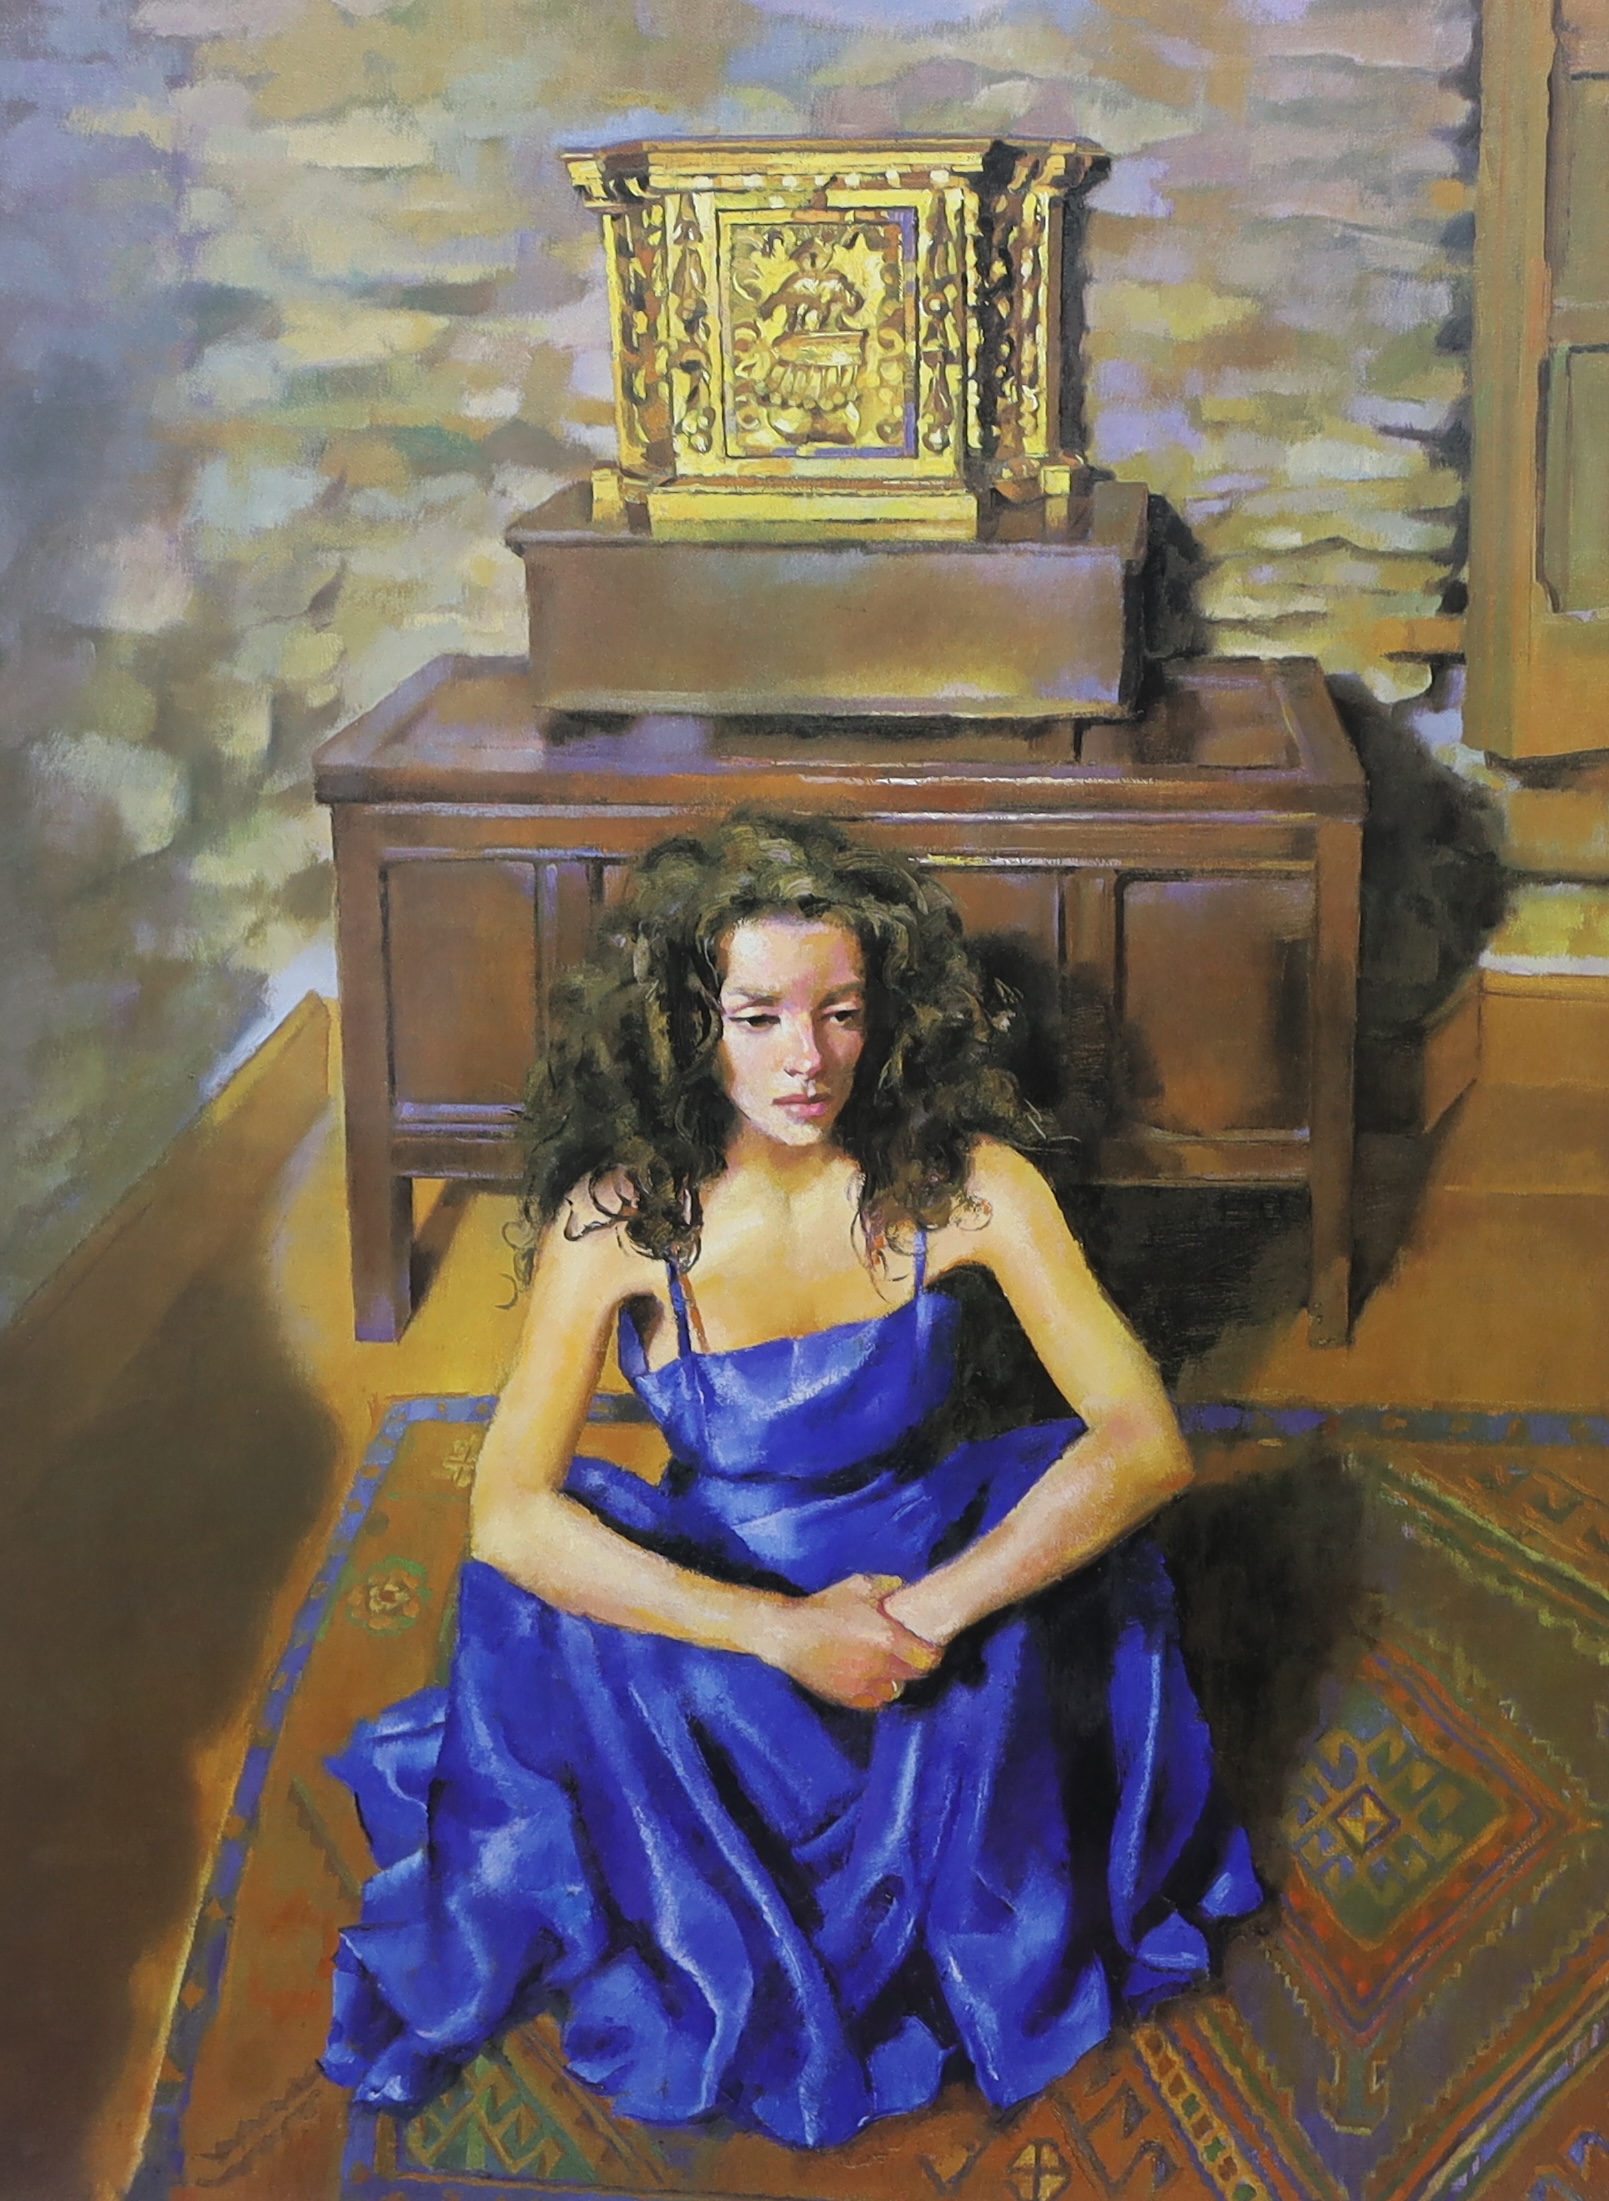 Robert Lenkiewicz (1941-2002), artist proof lithograph, 'Anna seated' (Millenium Edition), no.1V/XXV signed in pencil, titled and inscribed Anna Navas, 52 x 39cm. Condition - good